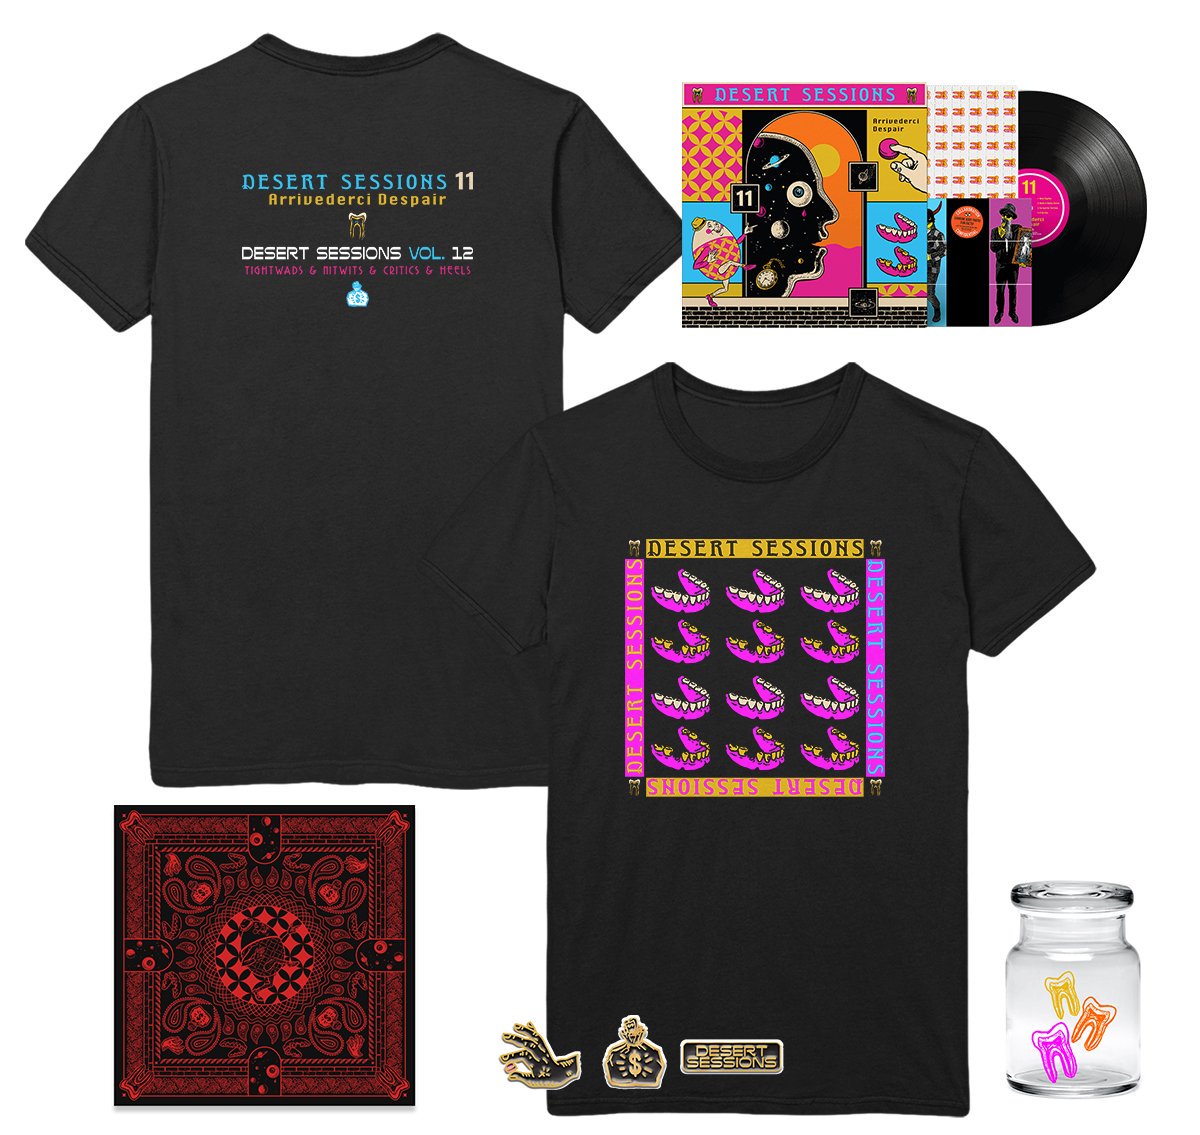 Desert Sessions Twitter: "Exclusive bundles including merch available in the official store. #DesertSessions https://t.co/MYtkYKF4sL" Twitter